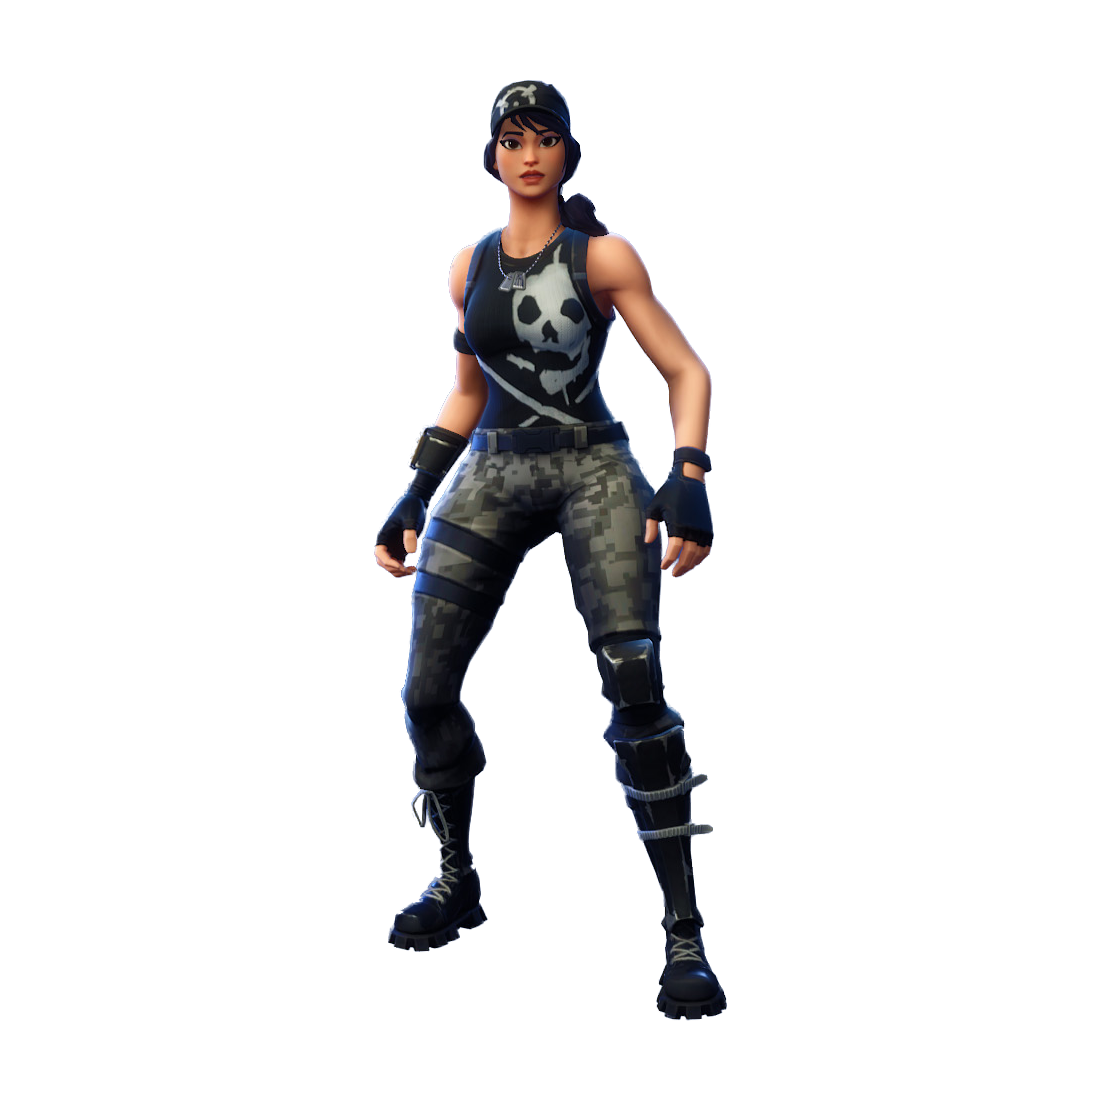 Fortnite Survival Specialist PNG Image - PurePNG | Free ... - 1100 x 1100 png 309kB